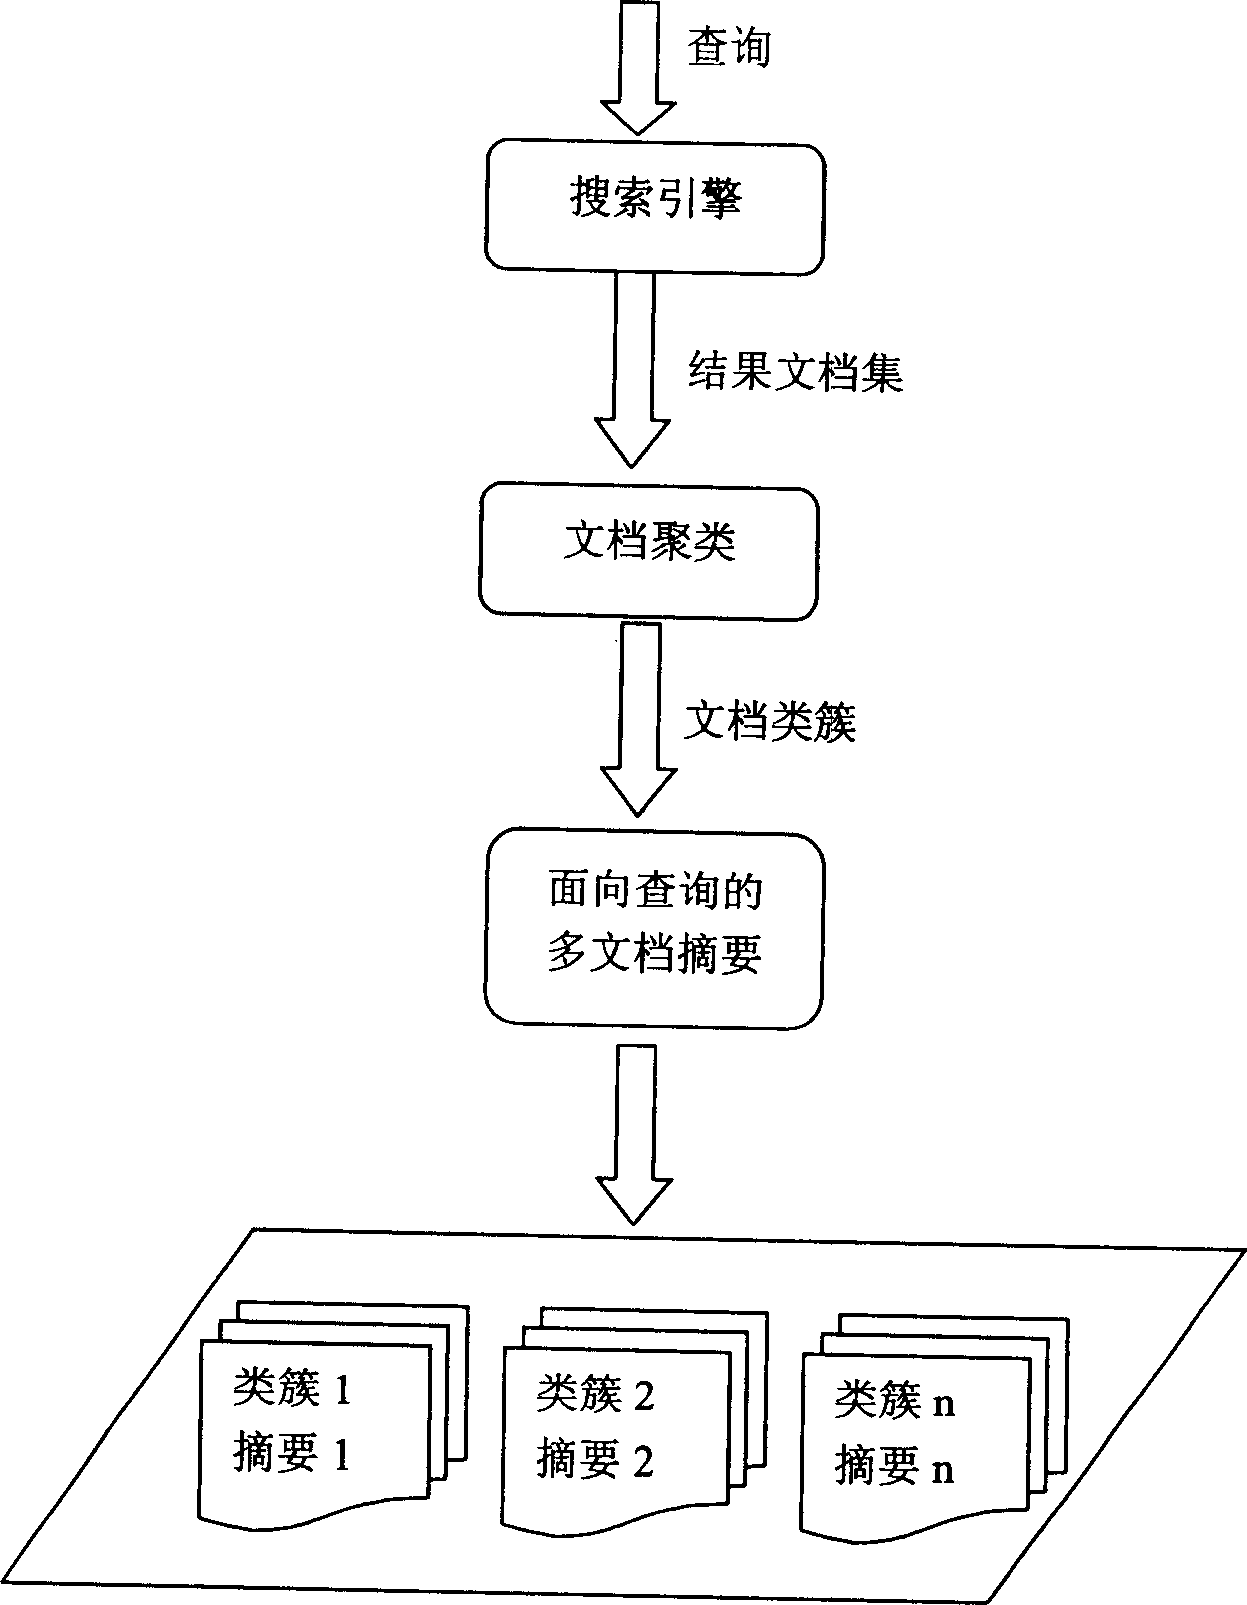 Multiple file summarization method facing subject or inquiry based on cluster arrangement